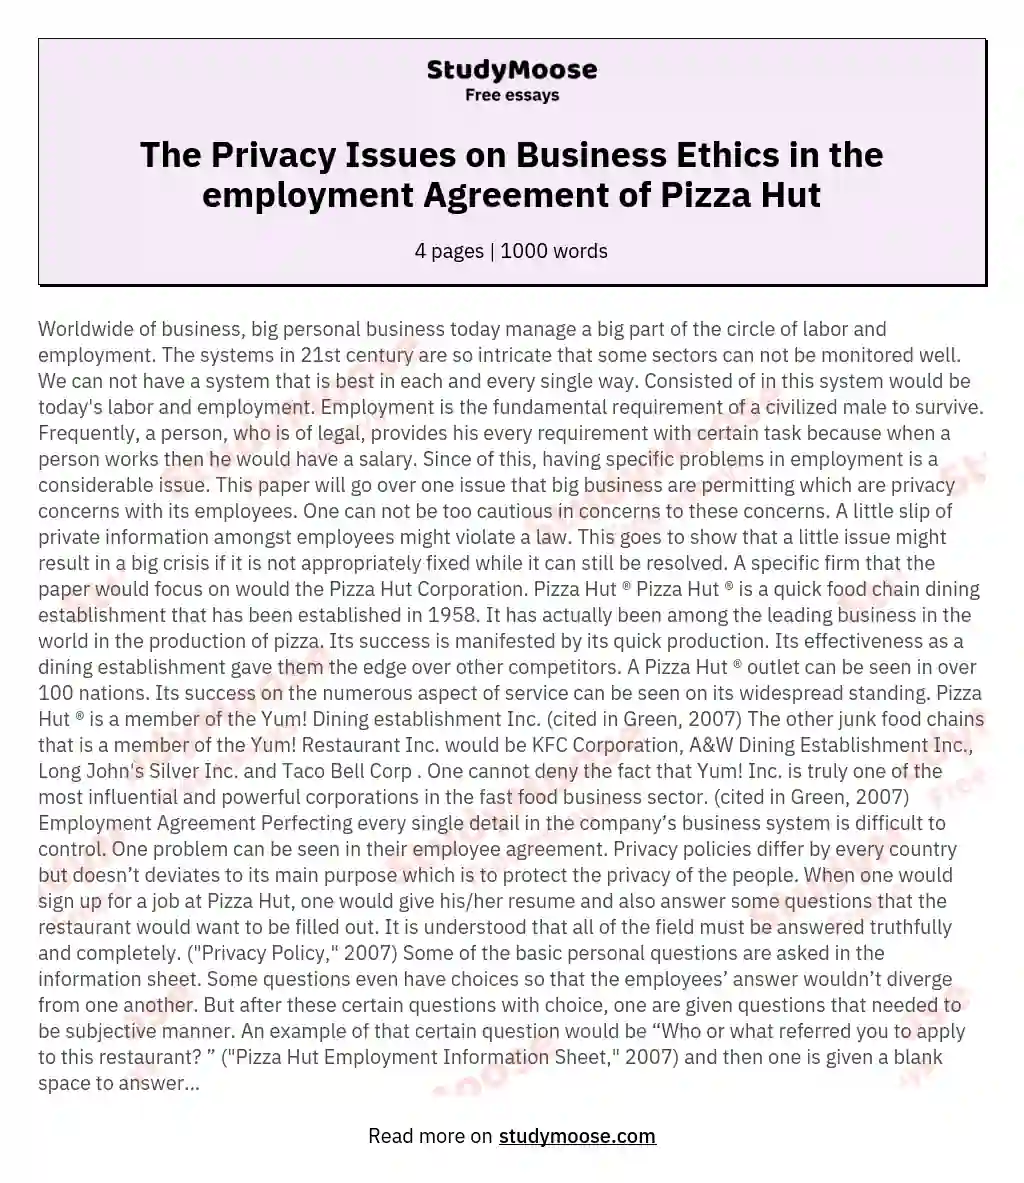 The Privacy Issues on Business Ethics in the employment Agreement of Pizza Hut essay